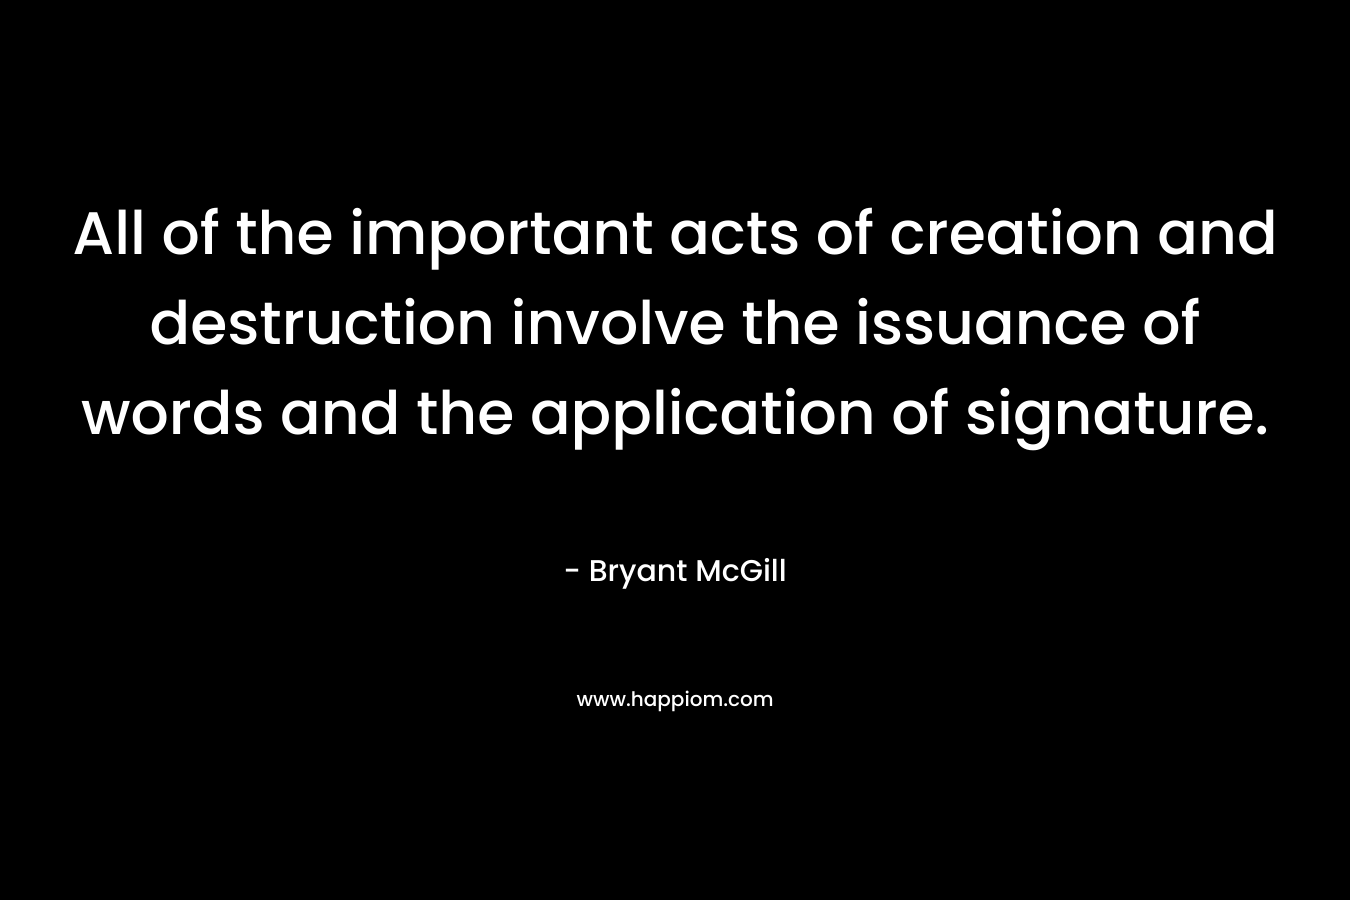 All of the important acts of creation and destruction involve the issuance of words and the application of signature. – Bryant McGill